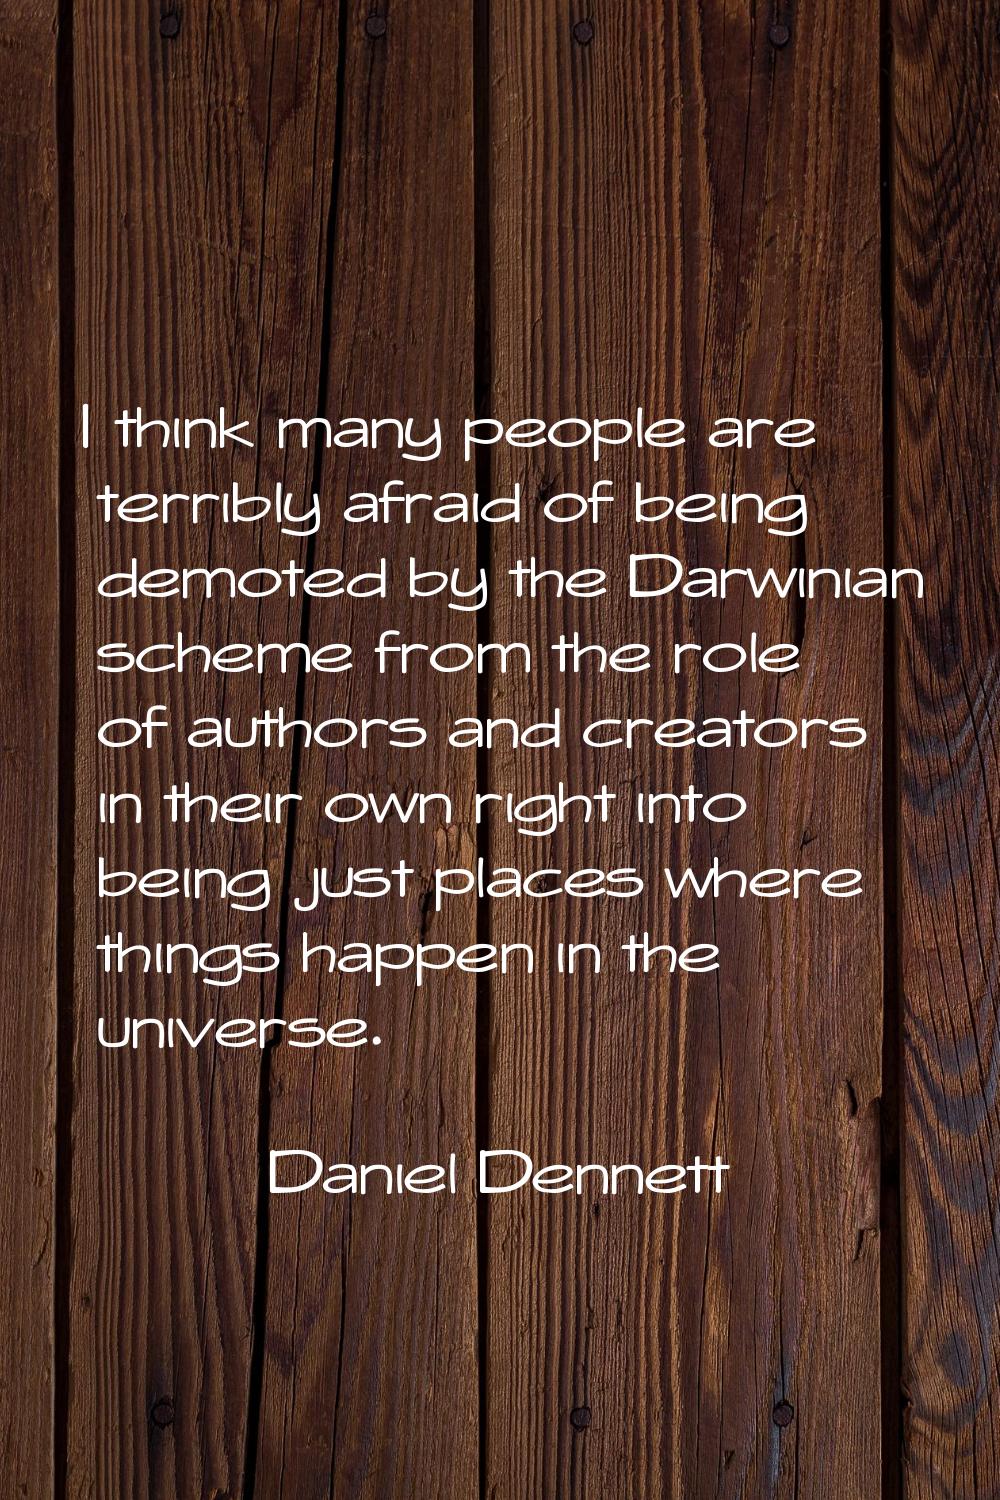 I think many people are terribly afraid of being demoted by the Darwinian scheme from the role of a